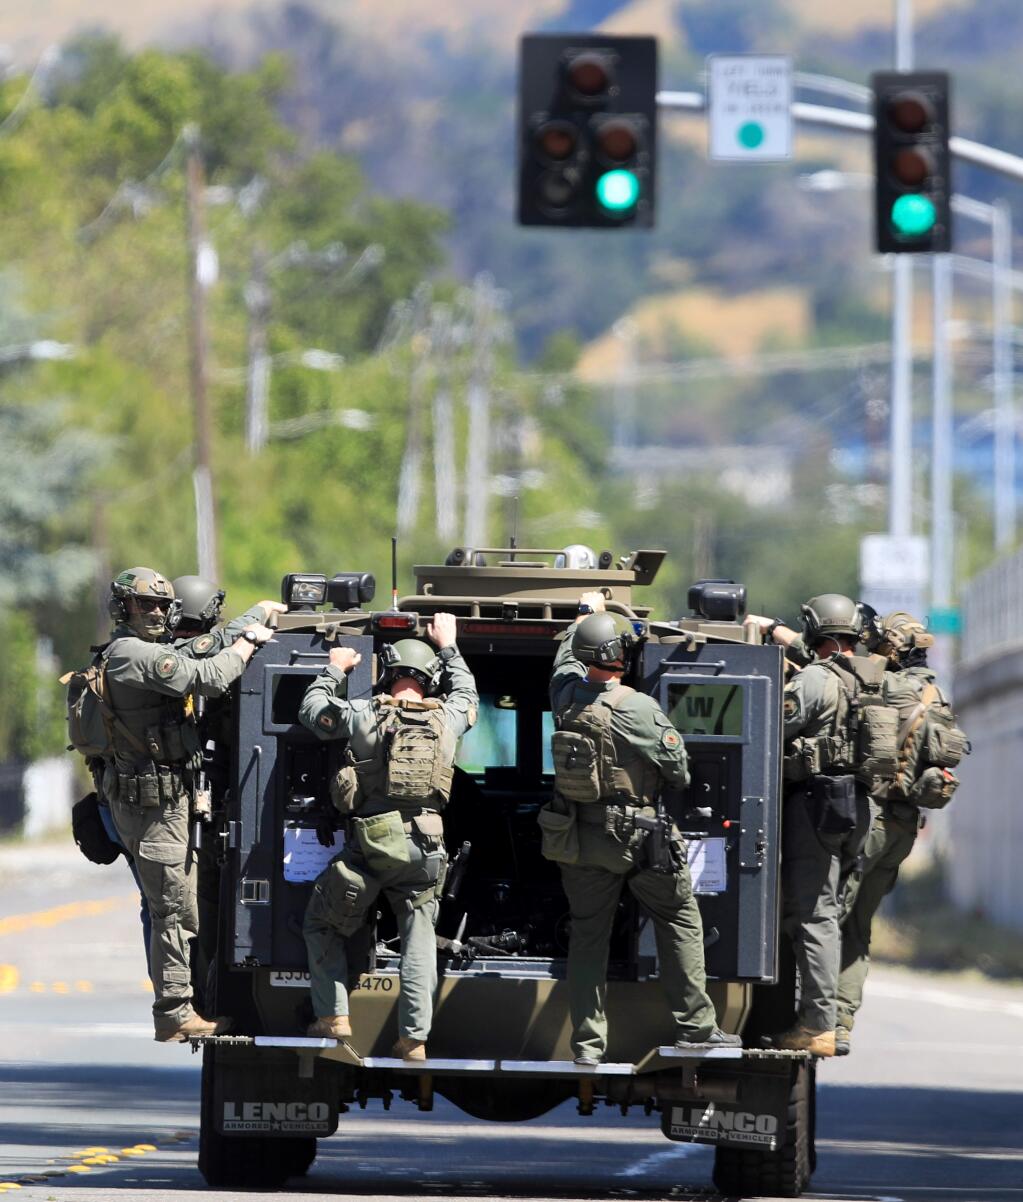 After searching a house on Cleveland Ave., Friday, May 15, 2020 in Santa Rosa, deputies with the Sonoma County Sheriff's Department leave the scene. The search was related to a gang related shooting Thursday night at Andy's Unity Park on Mooreland Ave. (Kent Porter / The Press Democrat) 2020